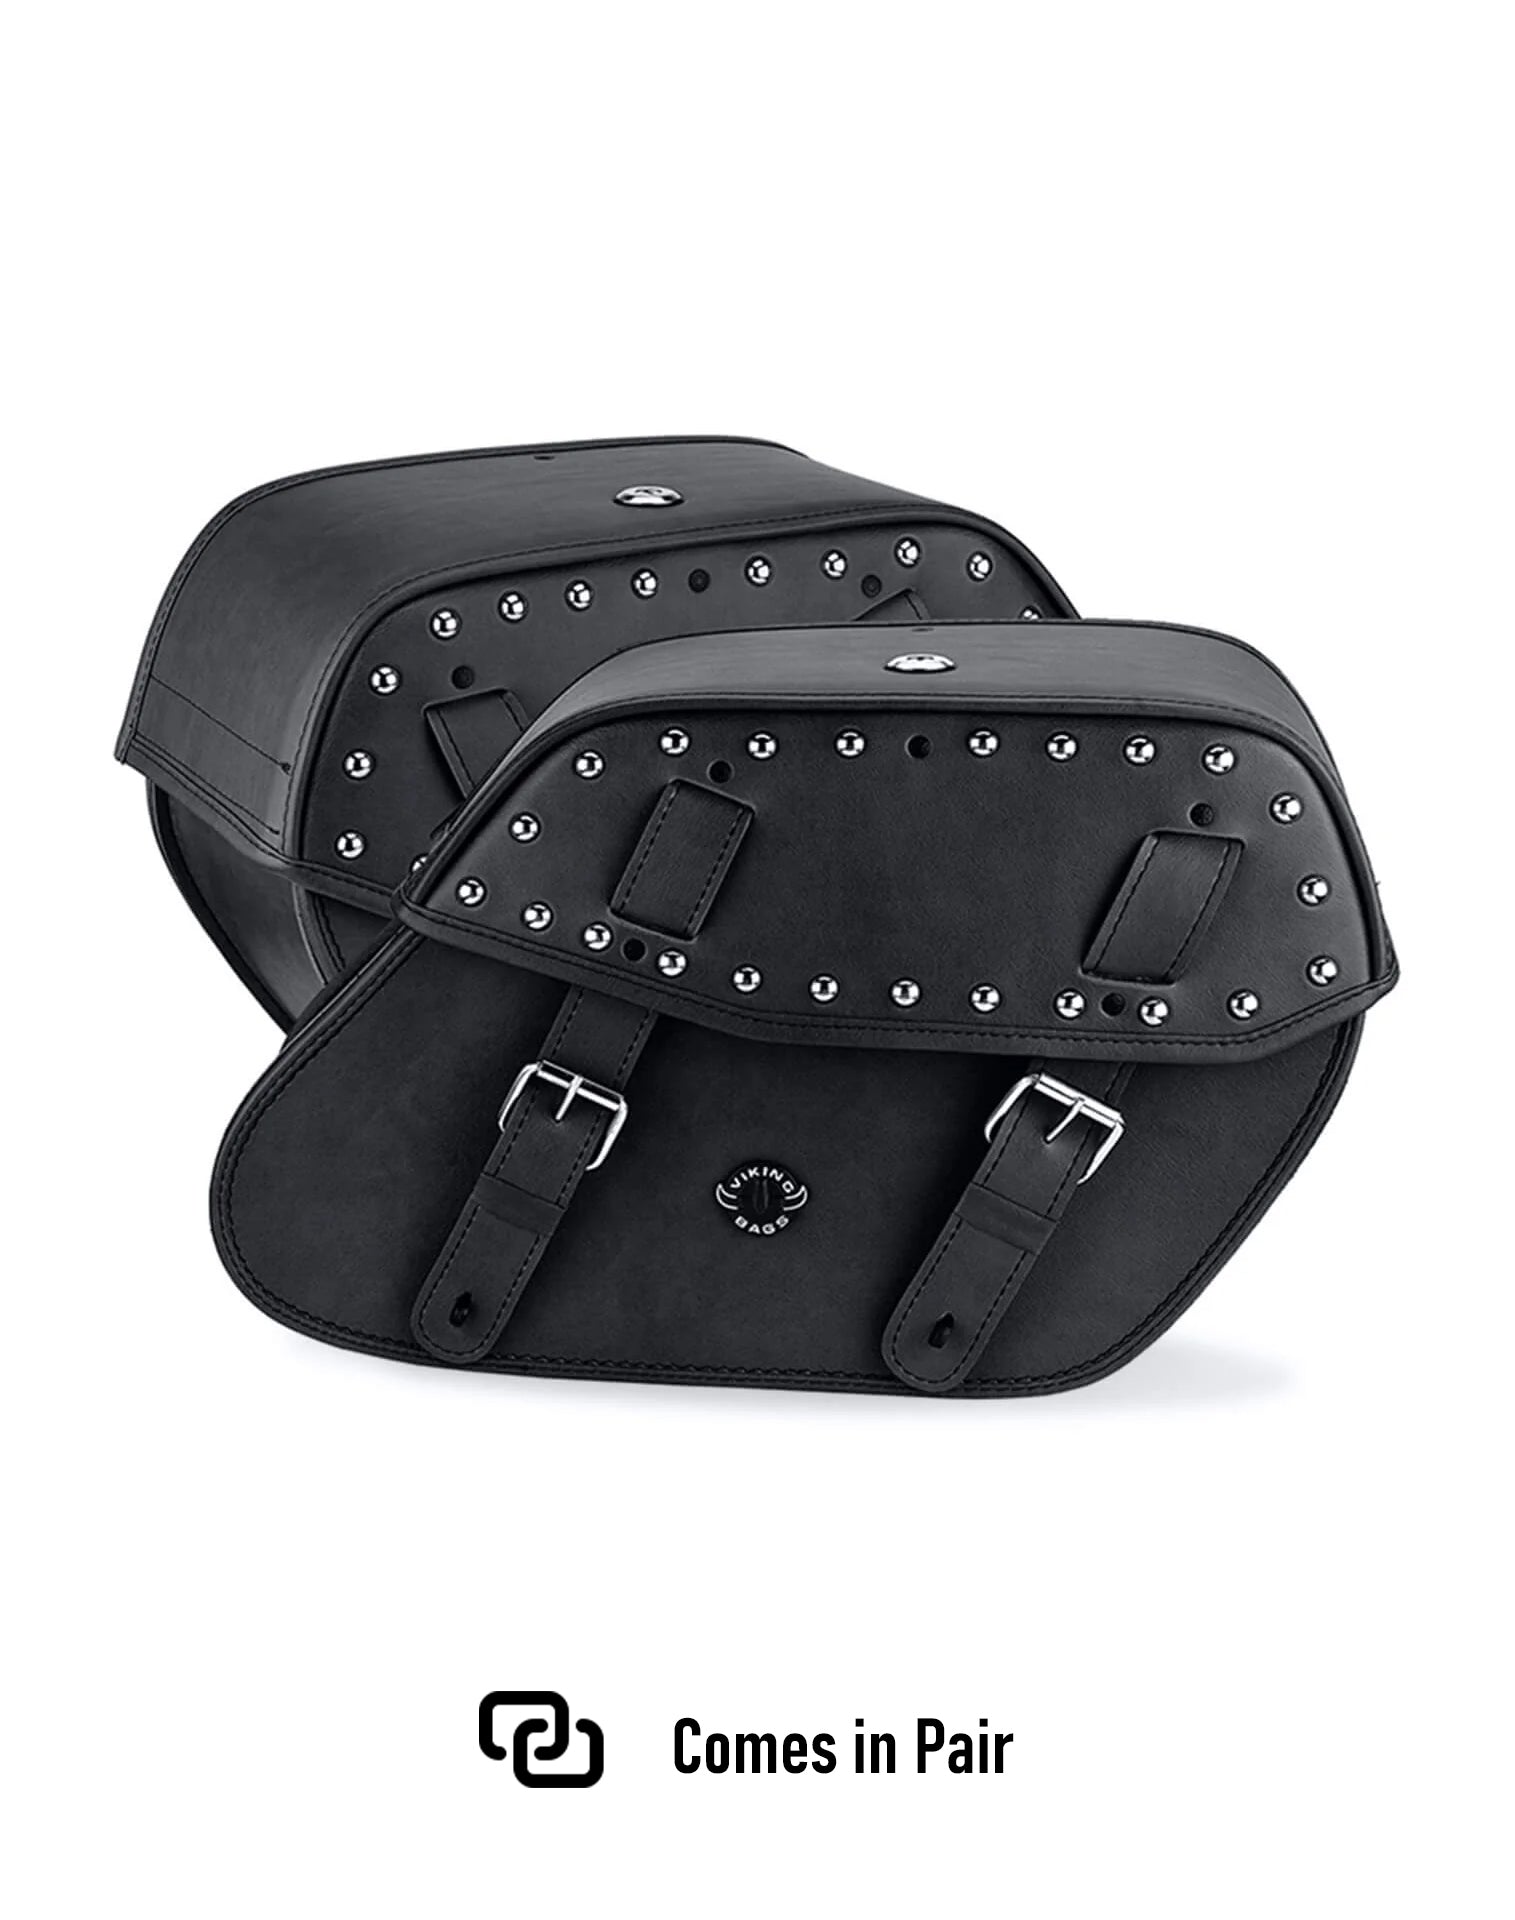 Viking Odin Large Triumph Thunderbird Lt Studded Leather Motorcycle Saddlebags Weather Resistant Bags Comes in Pair